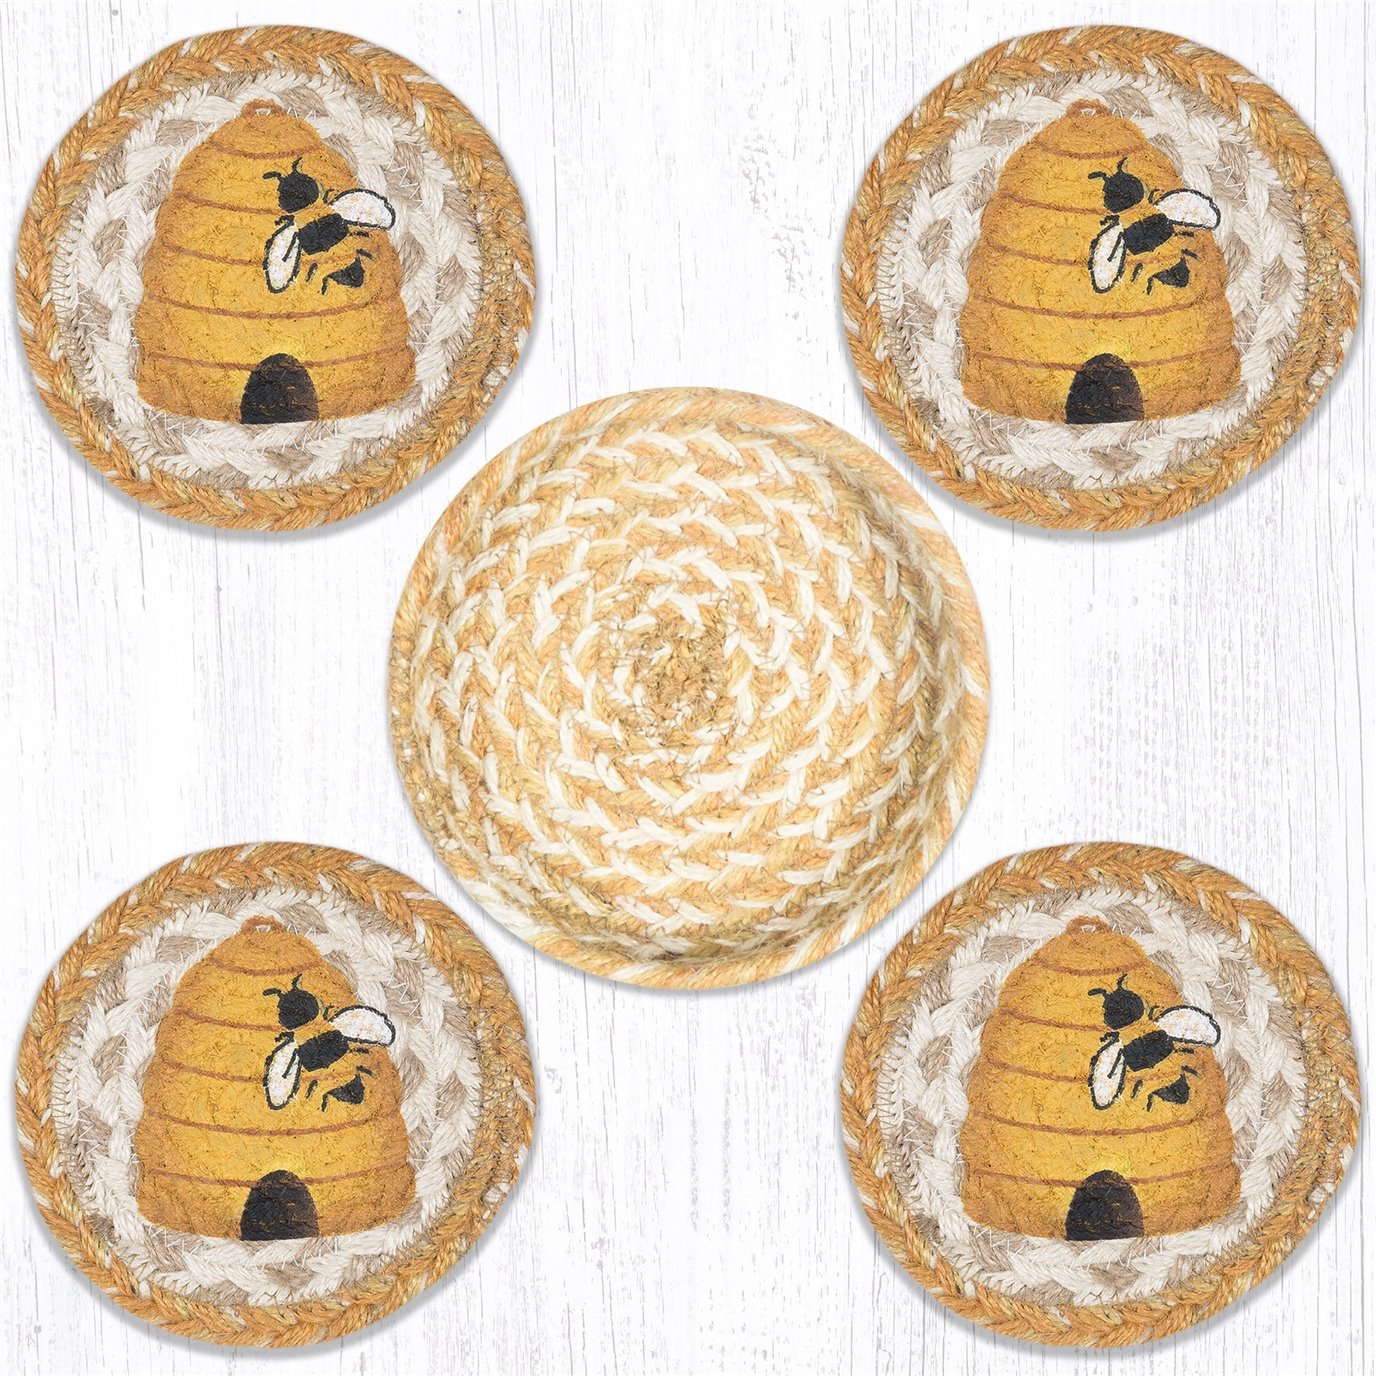 Beehive Braided Coasters in a Basket 5"x5" (Set of 4)